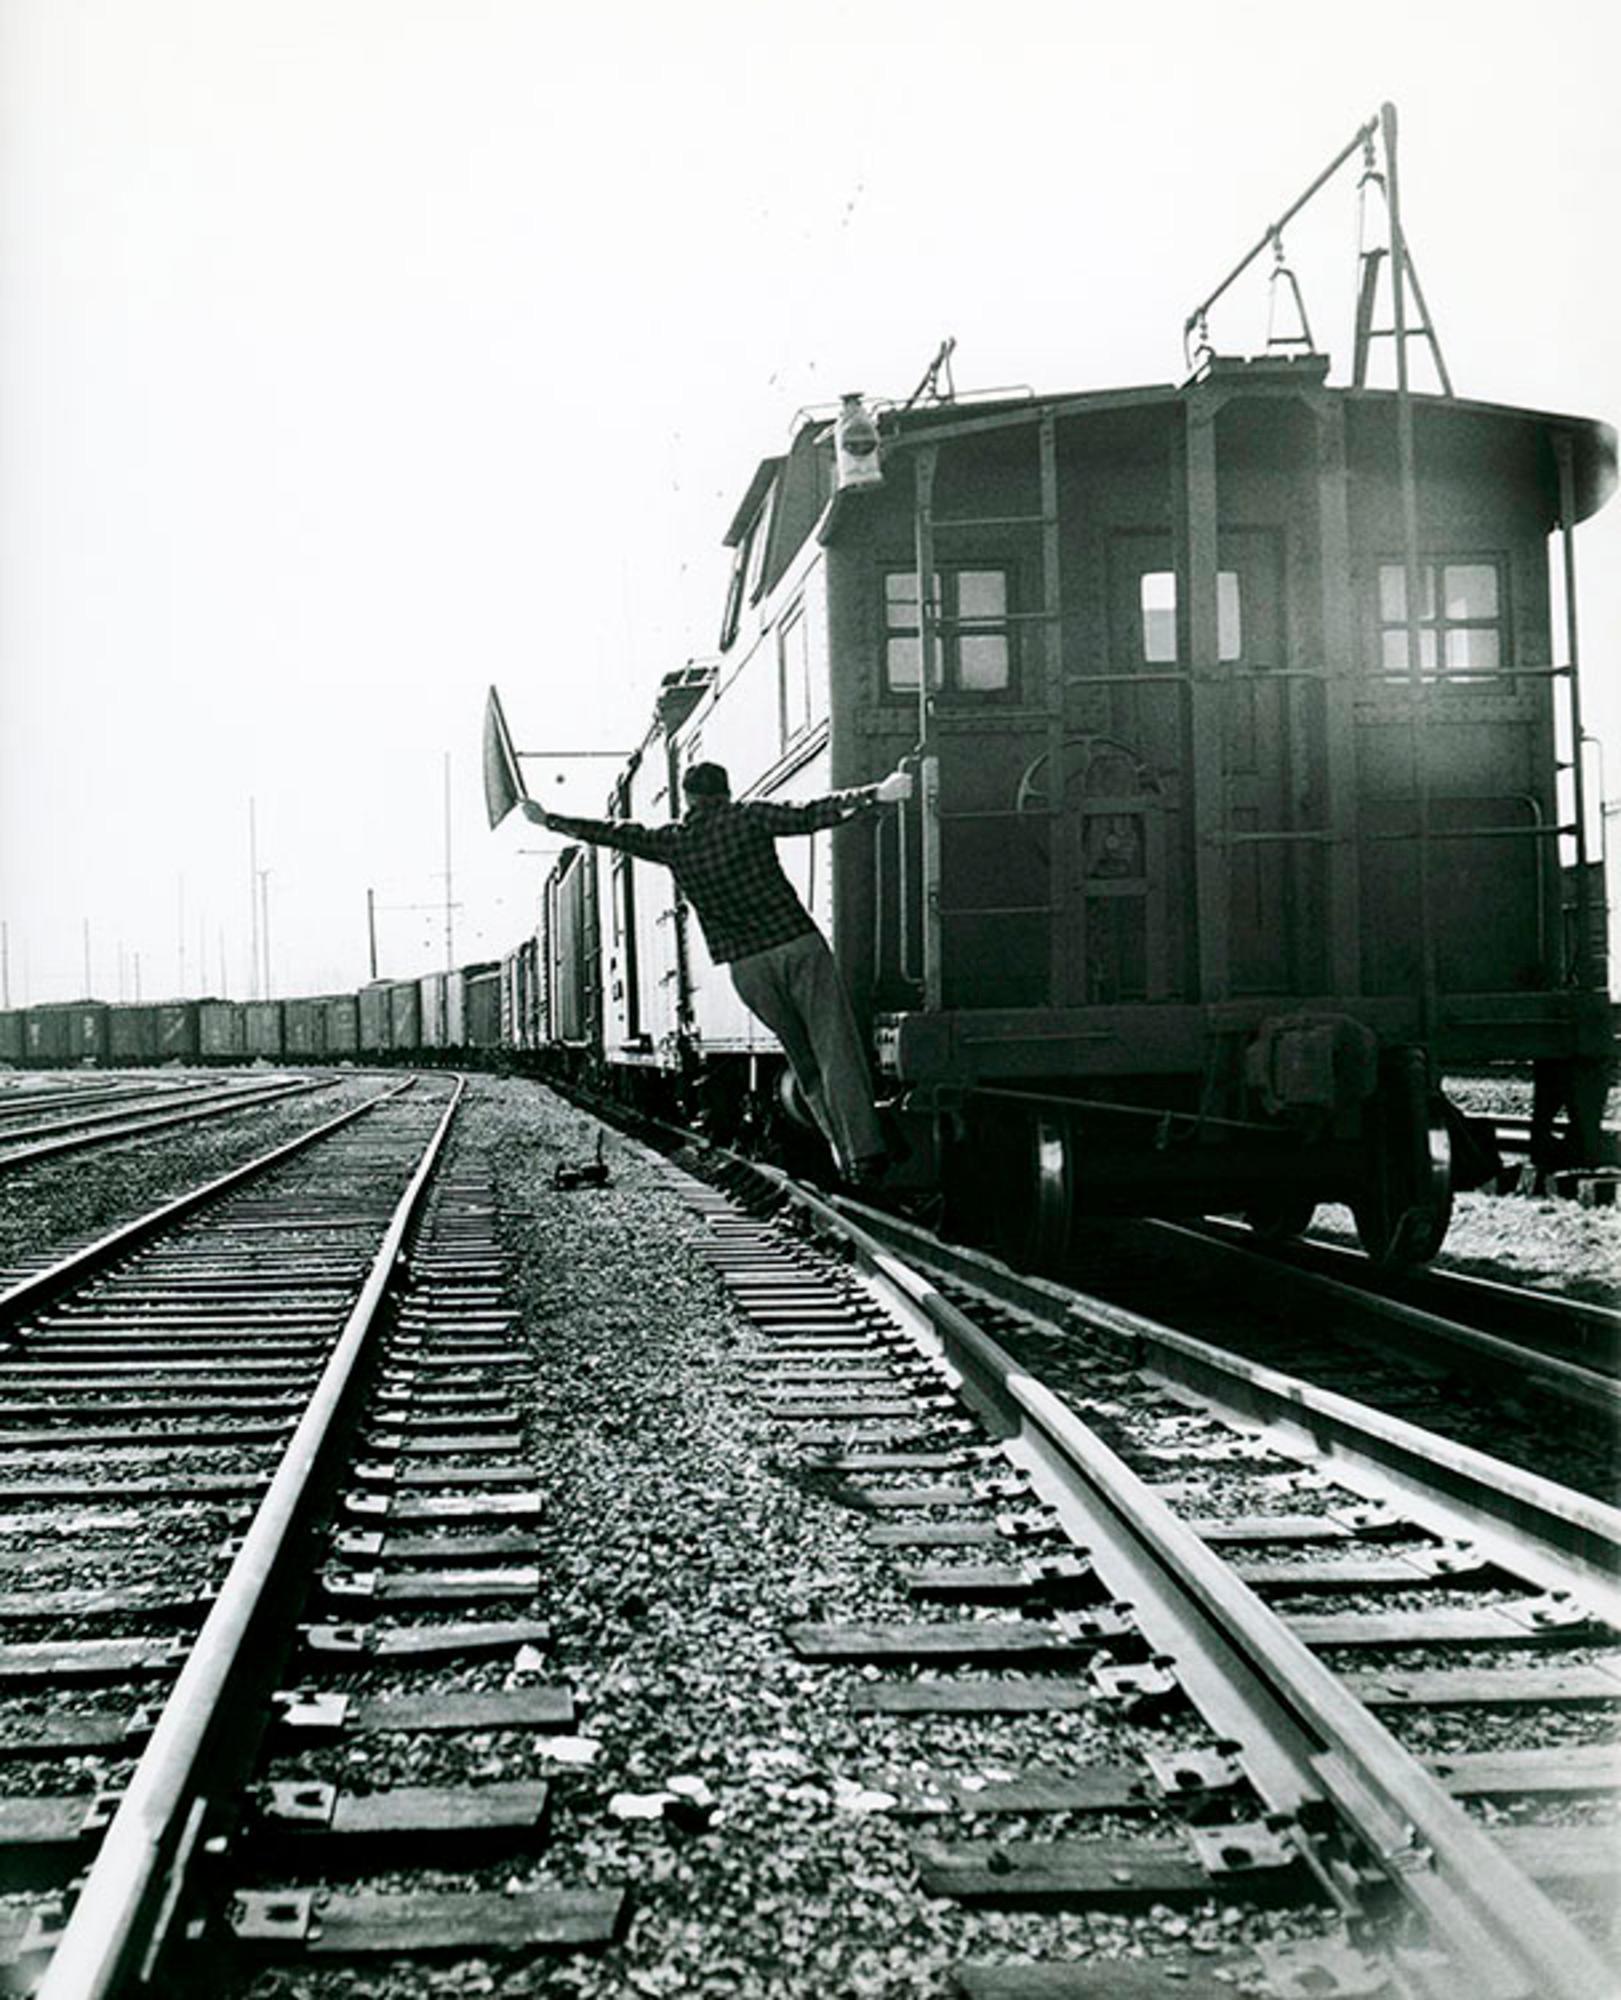 Lawrence Fried - Railway Signalman NYC, Photography 1951, Printed After